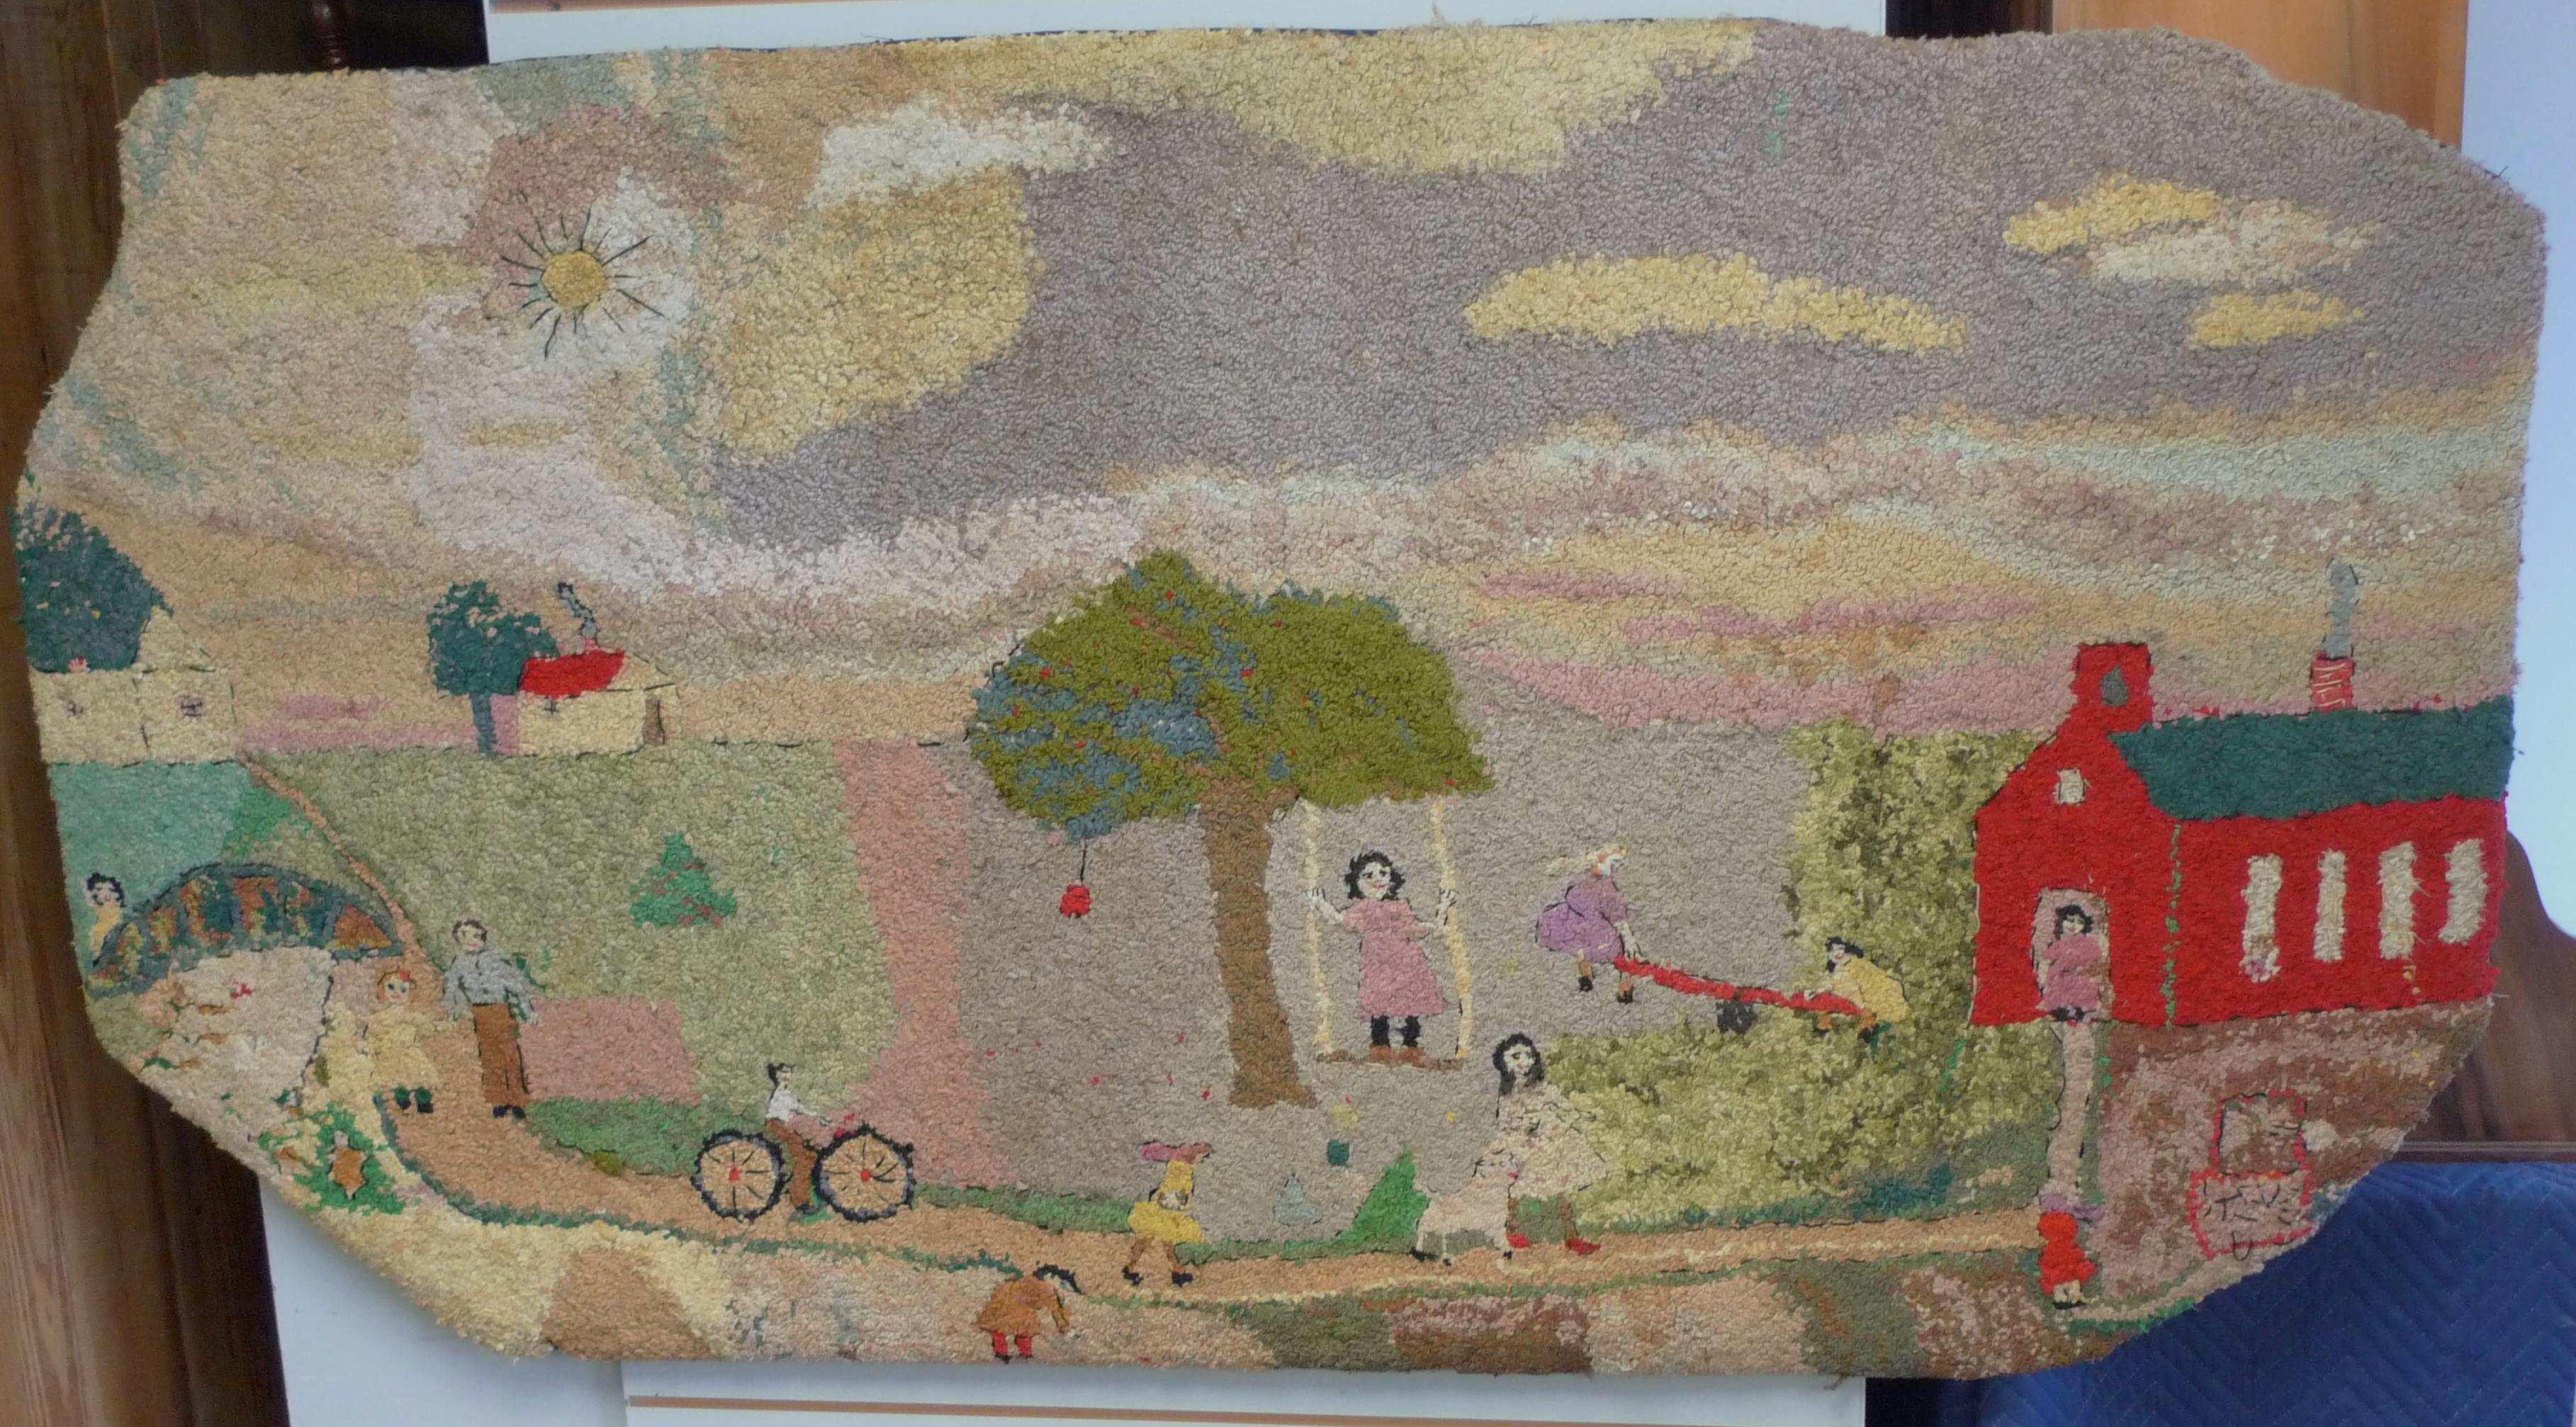 Folk Art rug of hand-hooked wool yarns depicts the morning arrival at a country schoolhouse. The earthen colors give way to bold, childlike playfulness, the sun shines bright, and the scene is bucolic at its best. Note the freeform edges to the